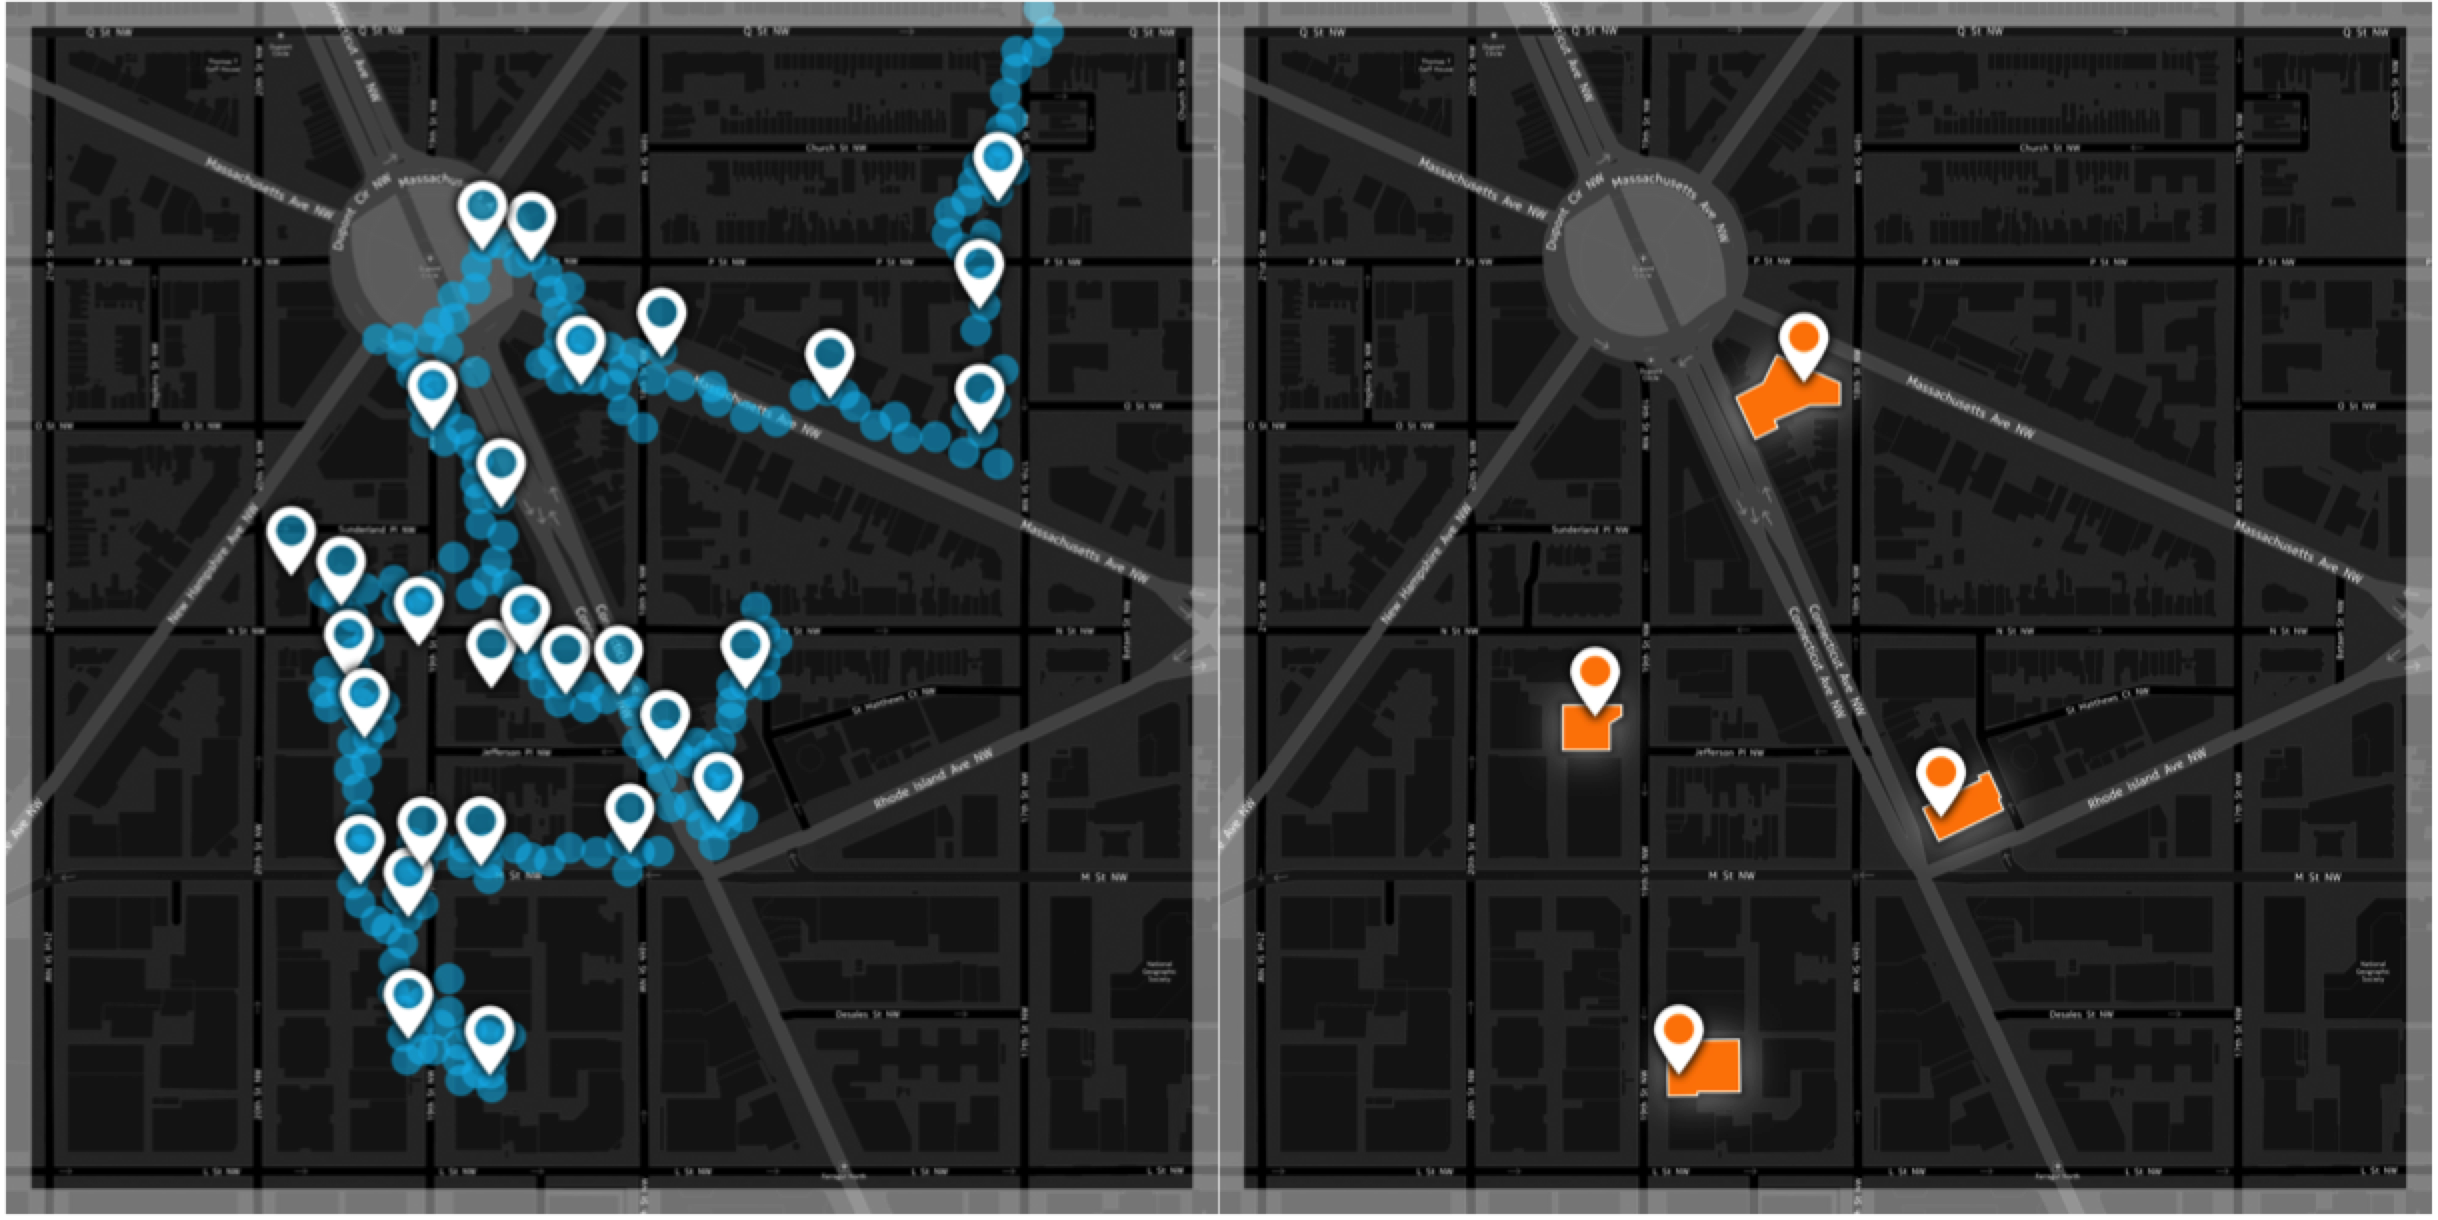 DC’s SocialRadar takes on Apple and Google location services